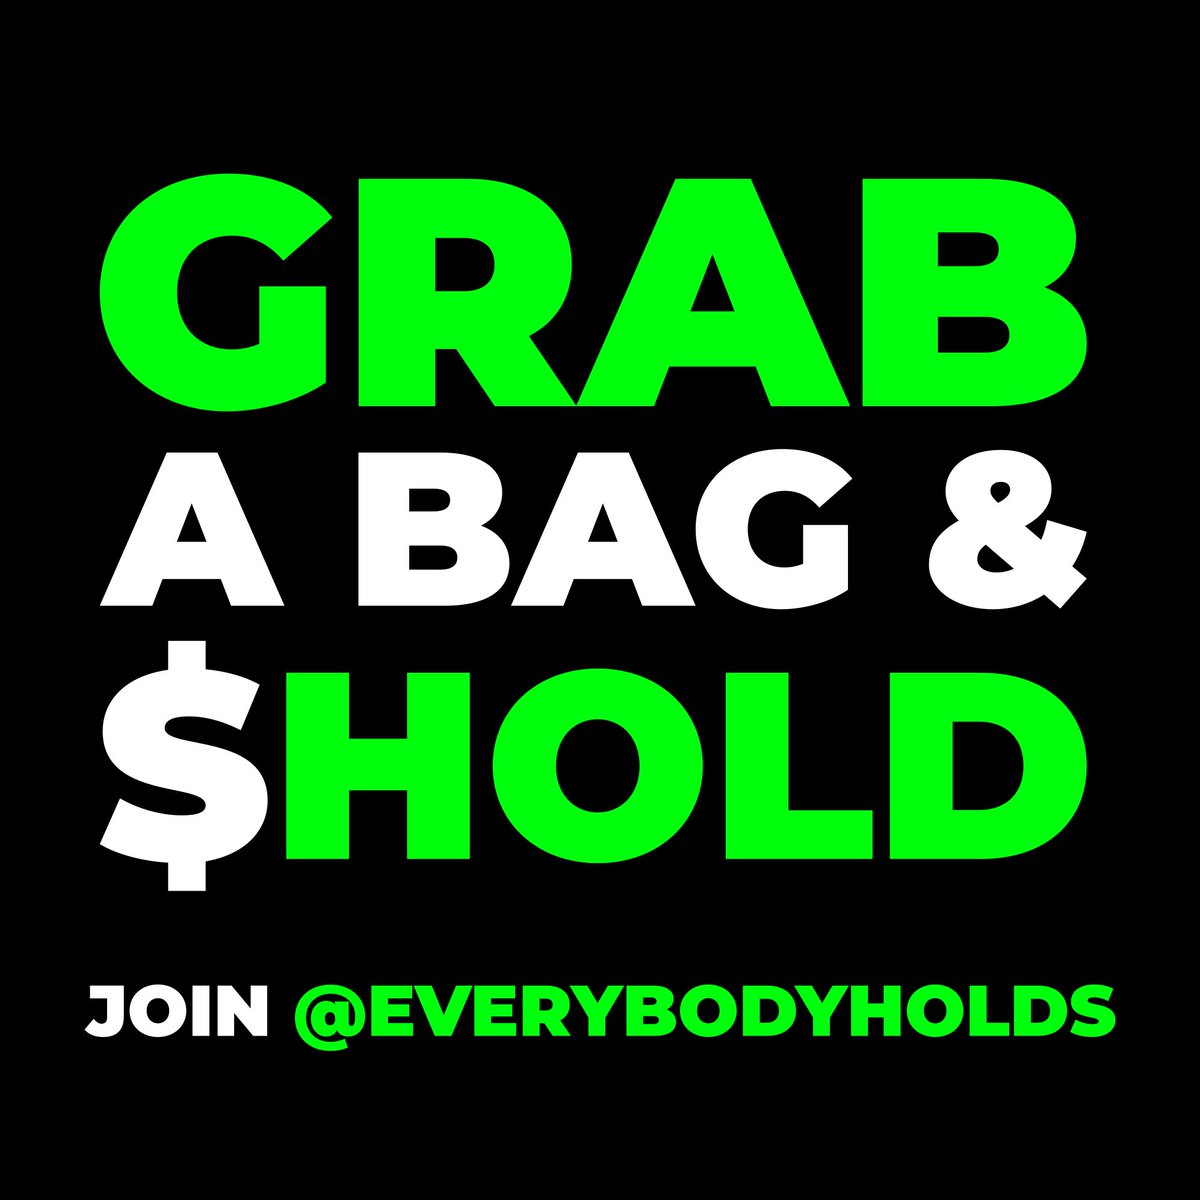 @Paddy_Stash $hold so close to launching! @everybodyholds #bullrun2024